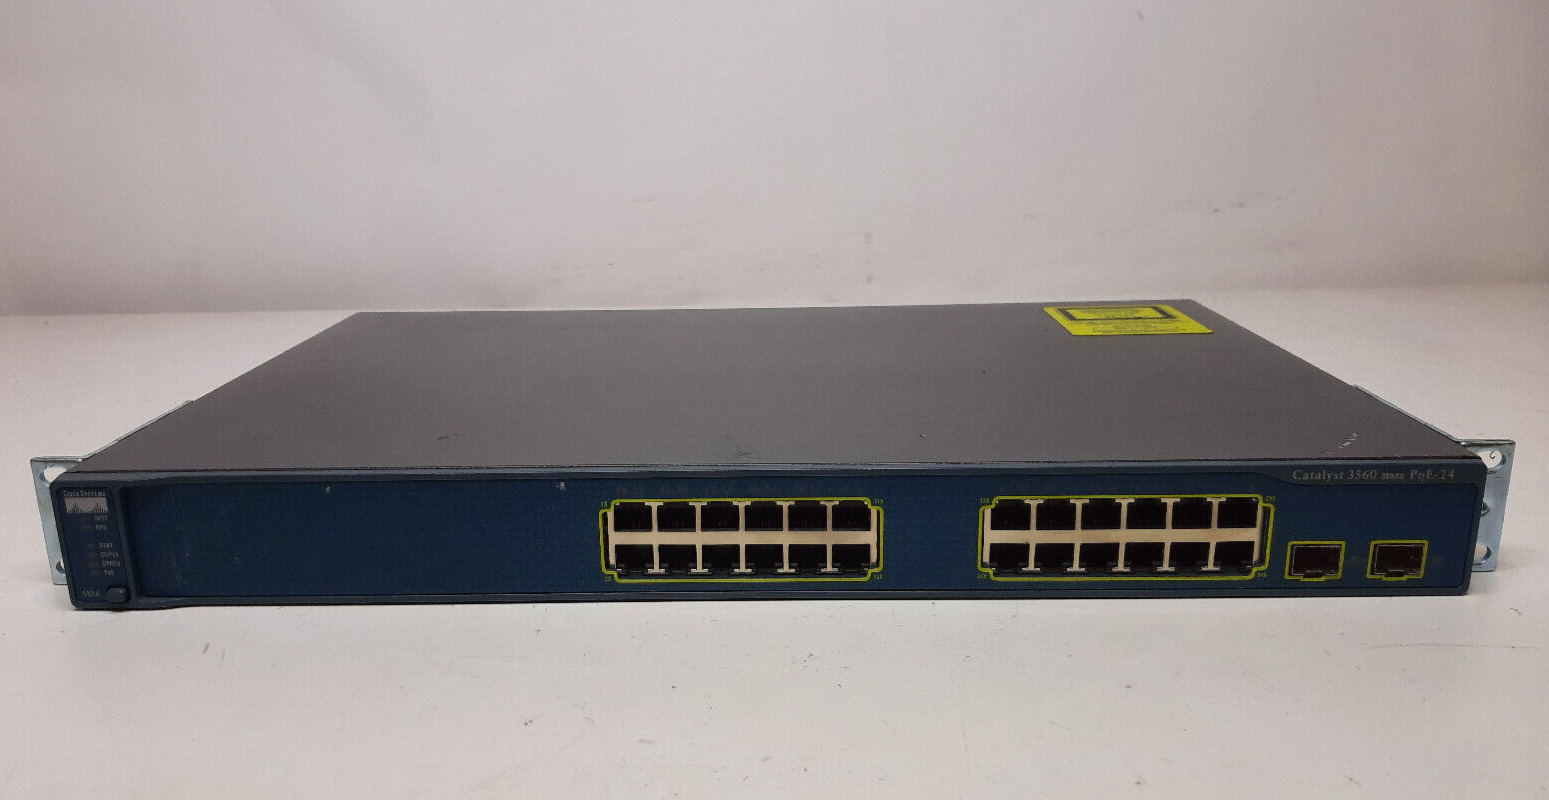 Cisco Catalyst 3560 24 Port Fast Ethernet Switch 370W PoE IOS 12 WS-C3560-24PS-E